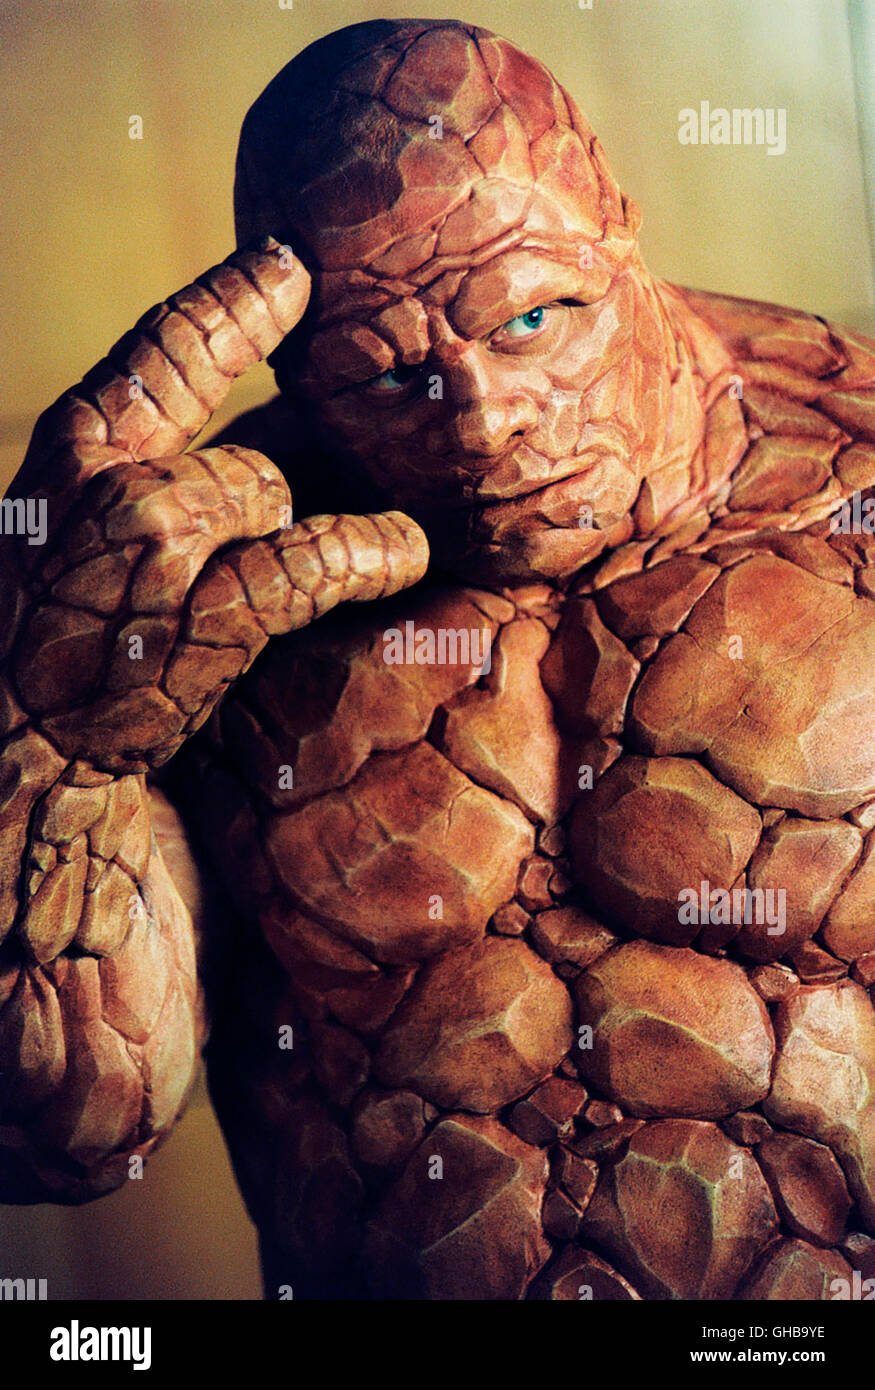 FANTASTIC FOUR D/USA 2005 Tim Story Ben Grimm/Mutation in The Thing  (MICHAEL CHIKLIS) Regie: Tim Story Stock Photo - Alamy